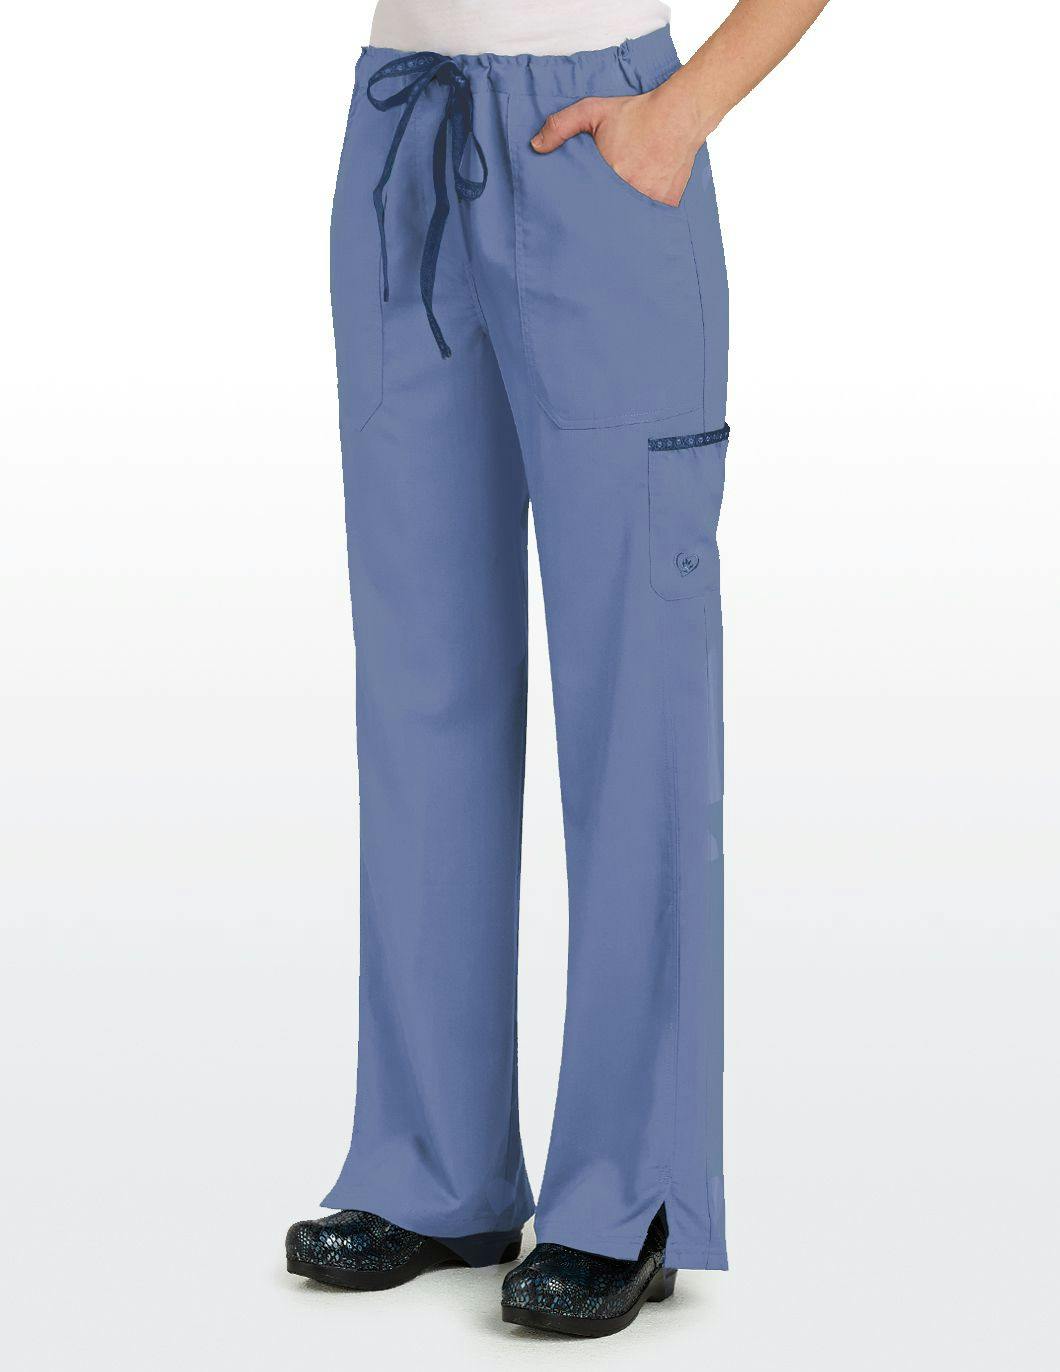 hearts-and-paws-womens-stretch-scrub-pant-ceil